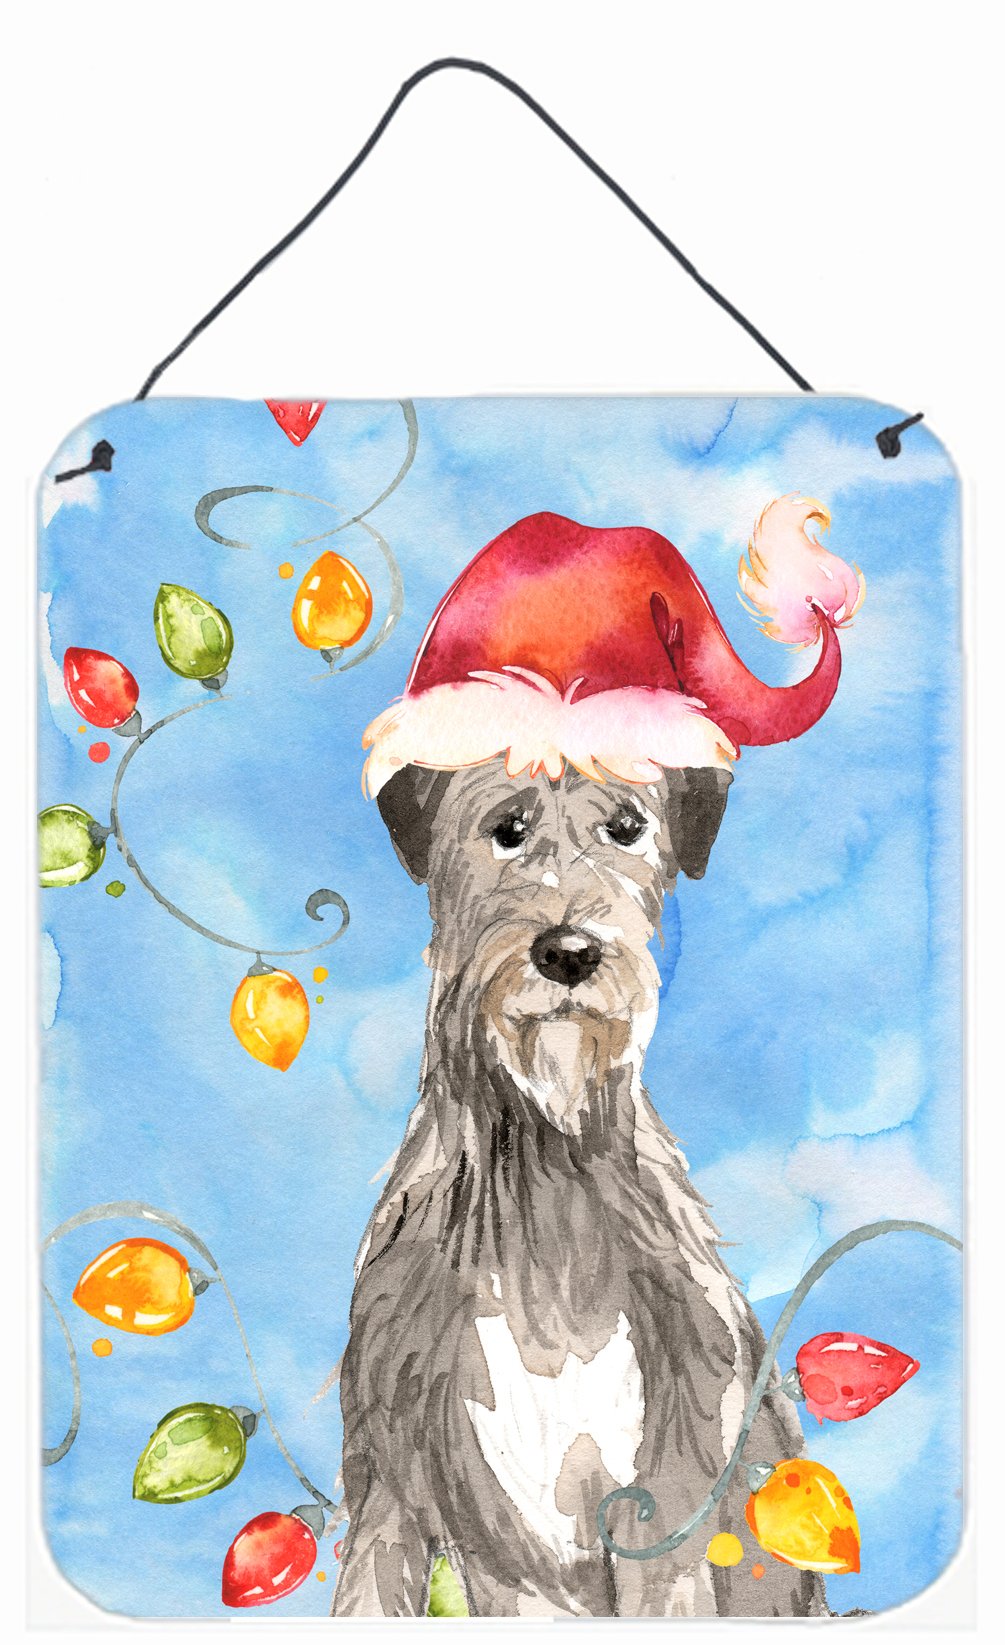 Christmas Lights Irish Wolfhound Wall or Door Hanging Prints CK2481DS1216 by Caroline's Treasures